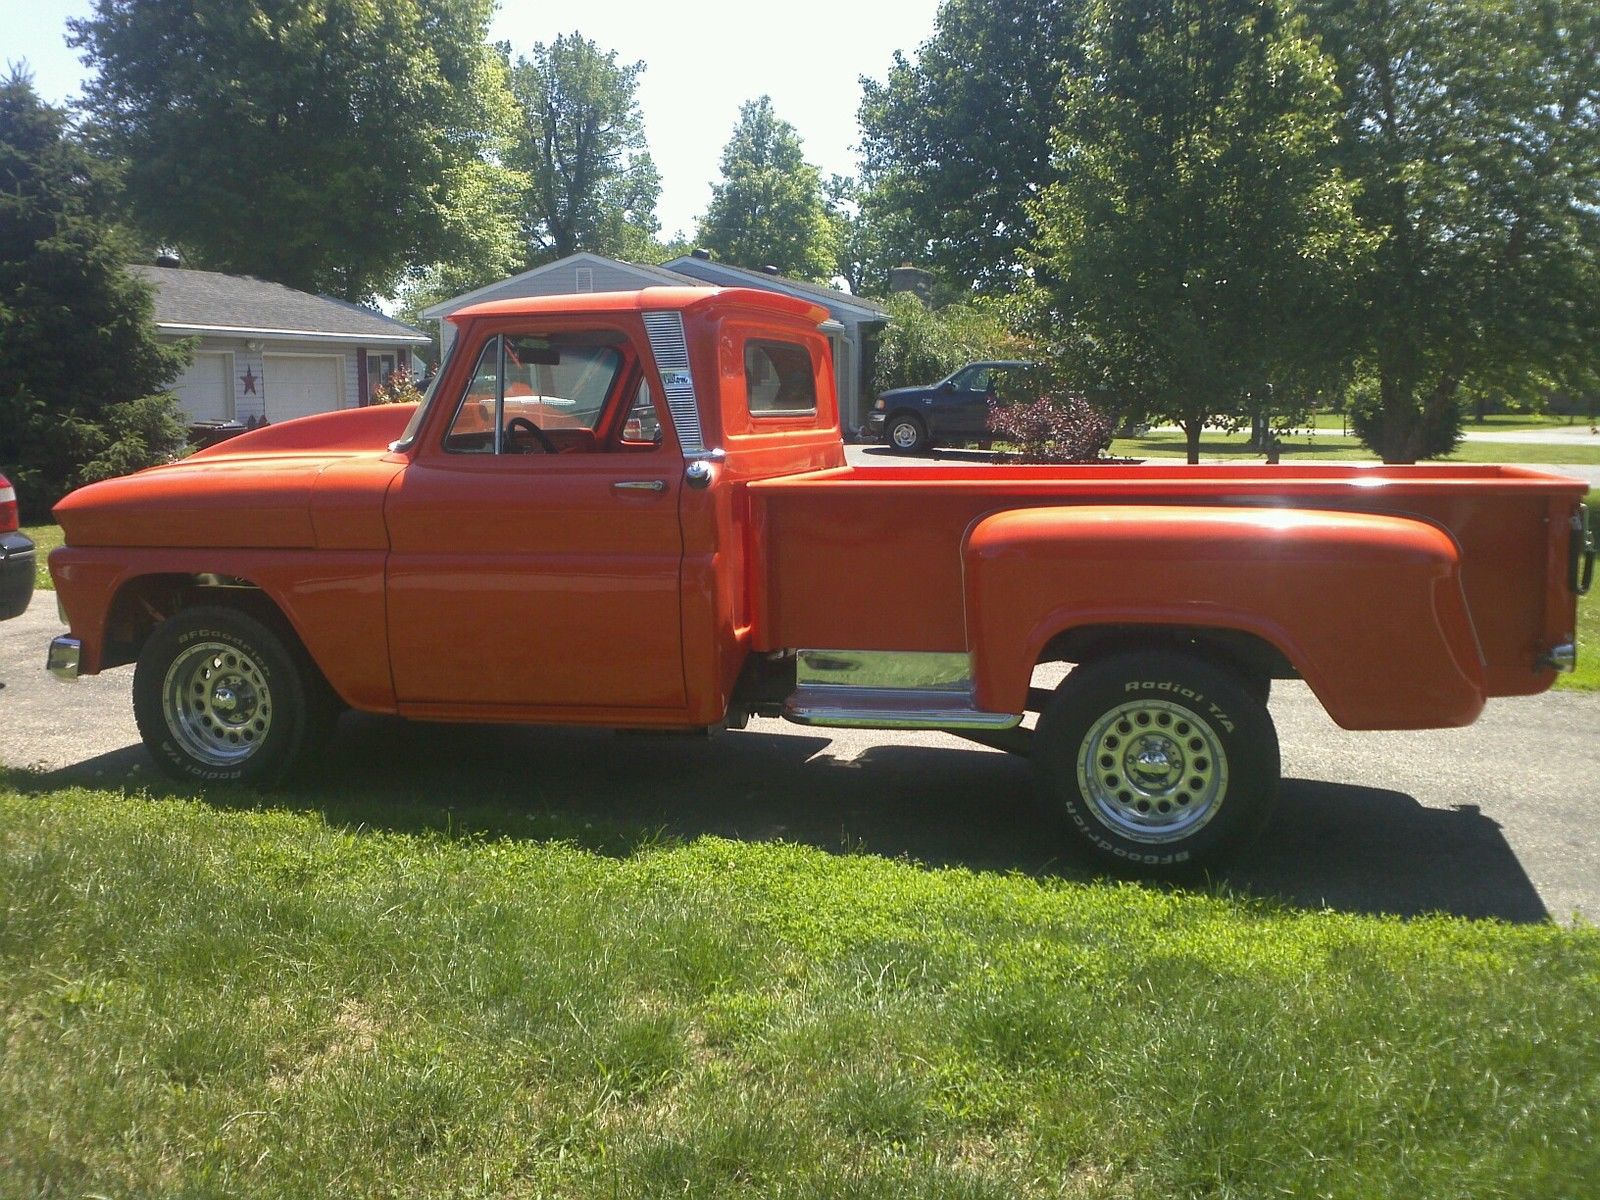 1965 Chevrolet C-10 for sale in Fairfield, Ohio, United States.